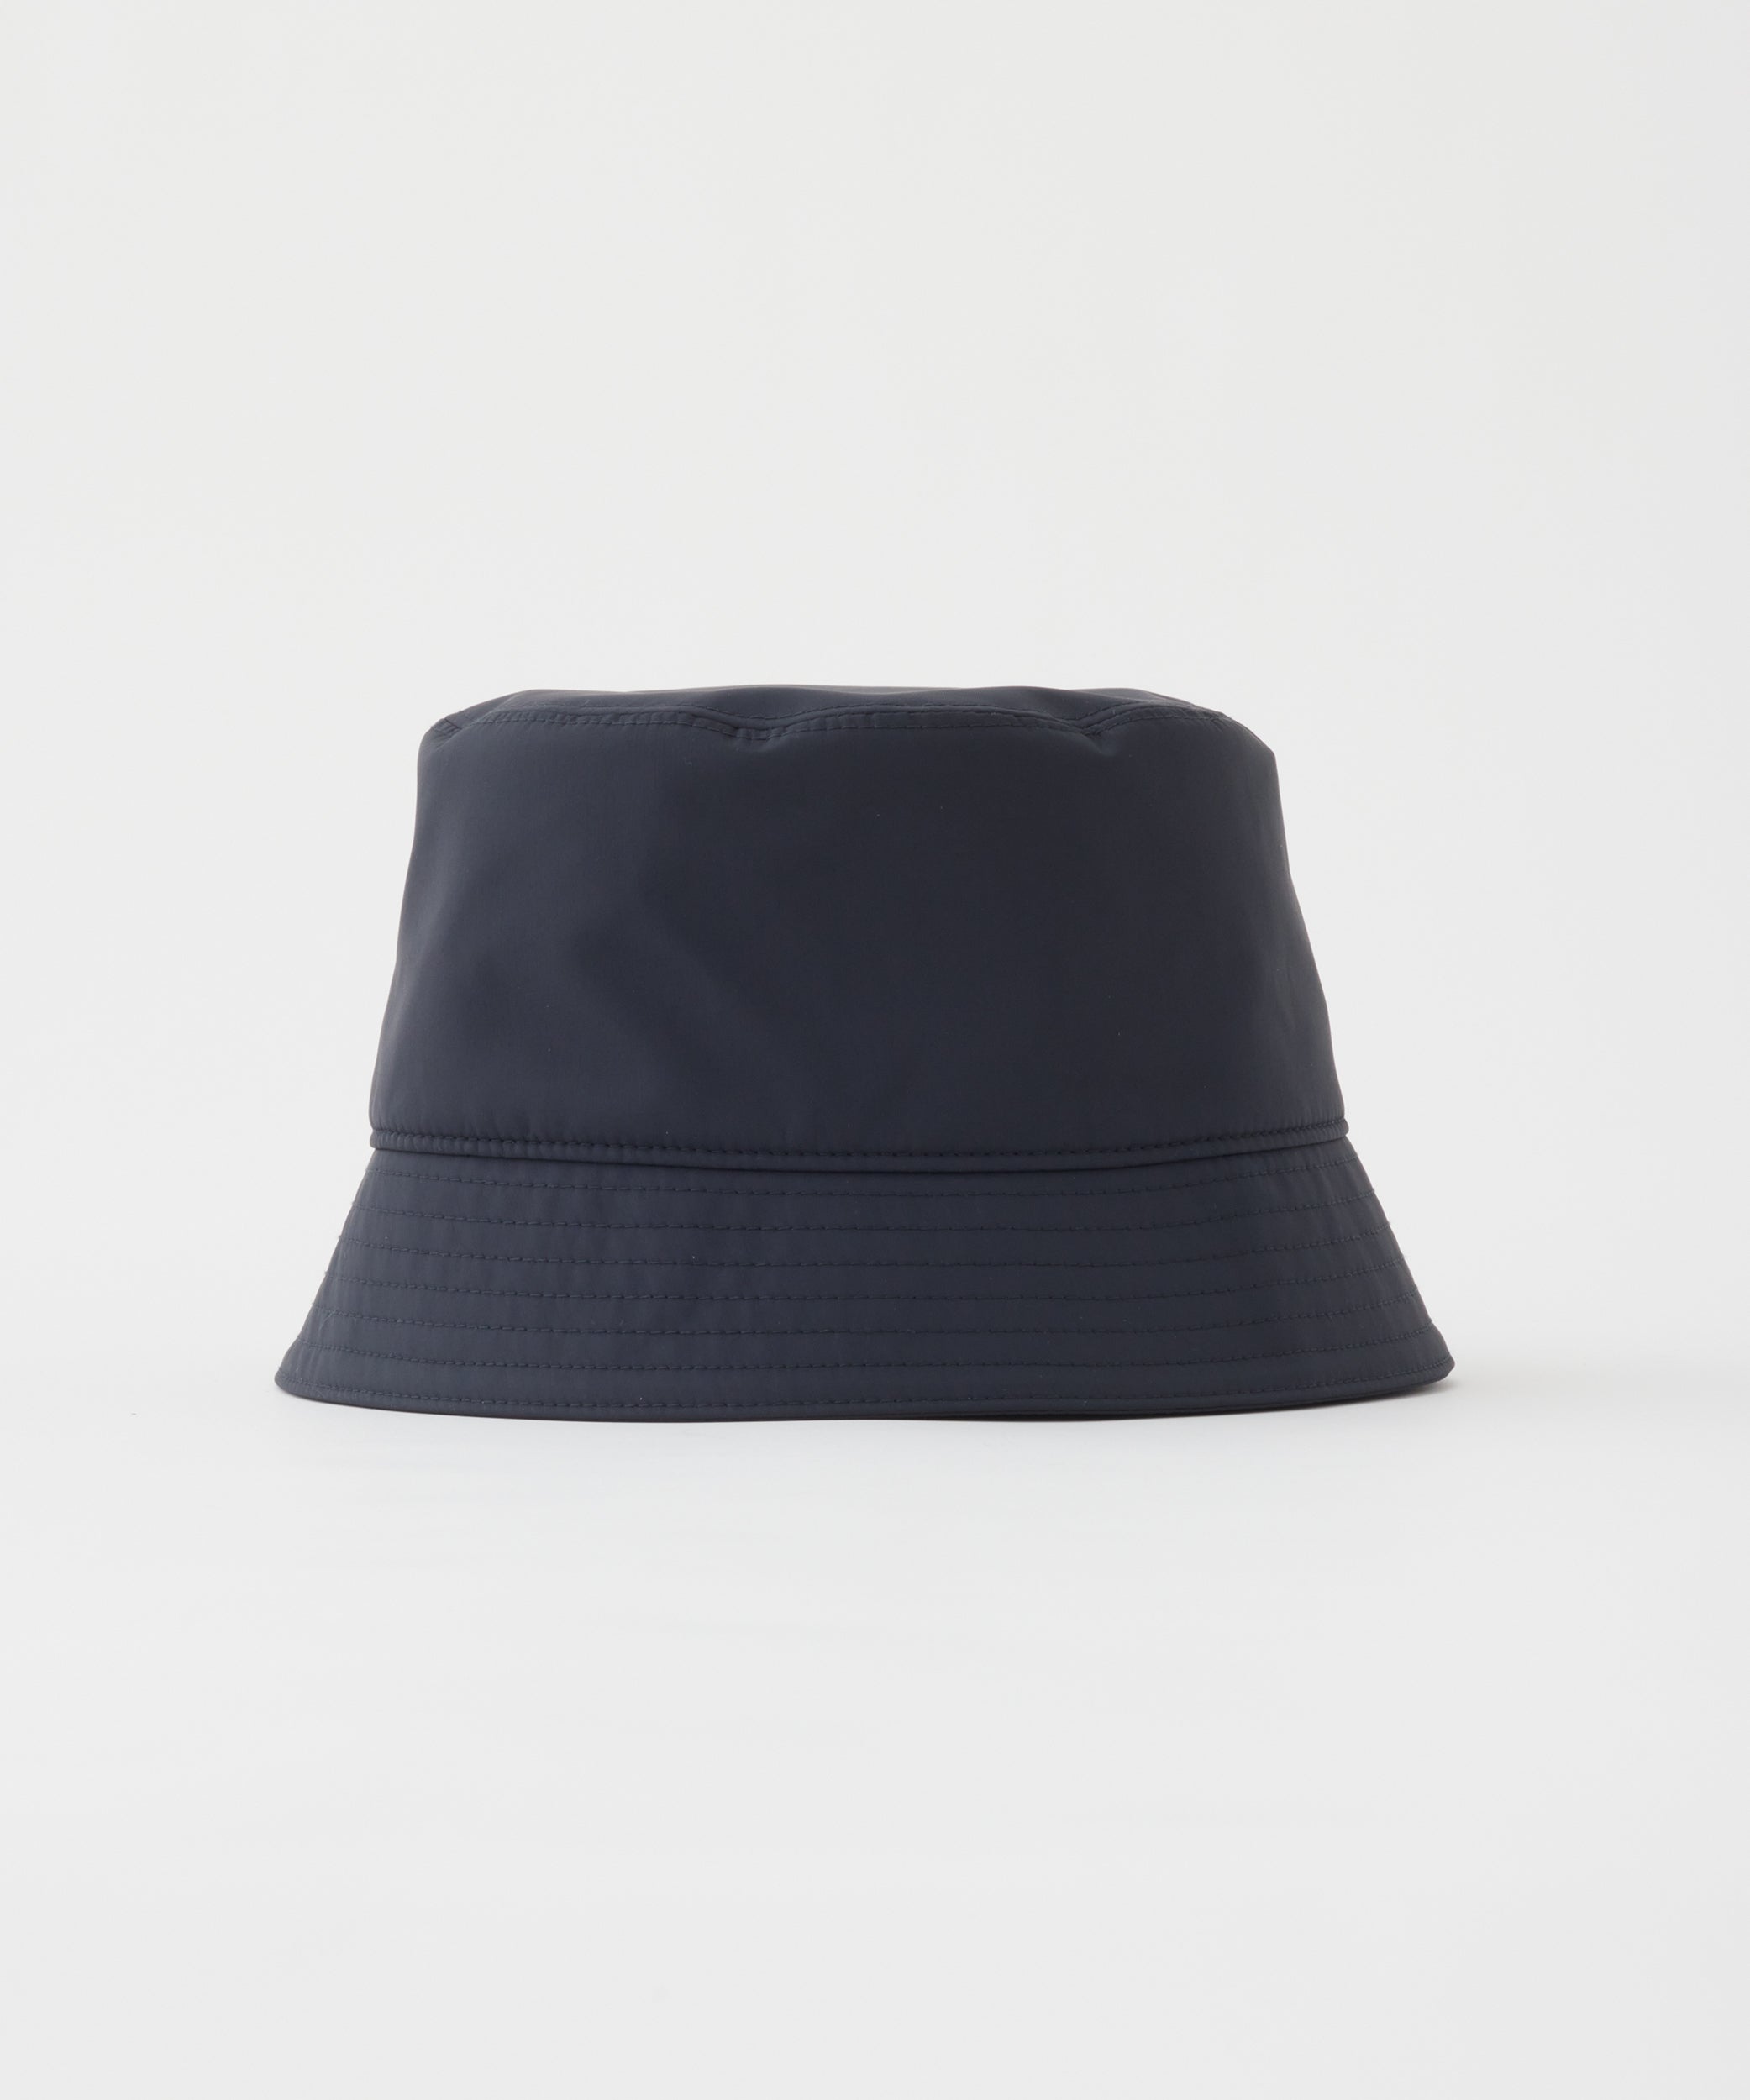 「OUT STOCK」 3 LAYER BUCKET HAT 